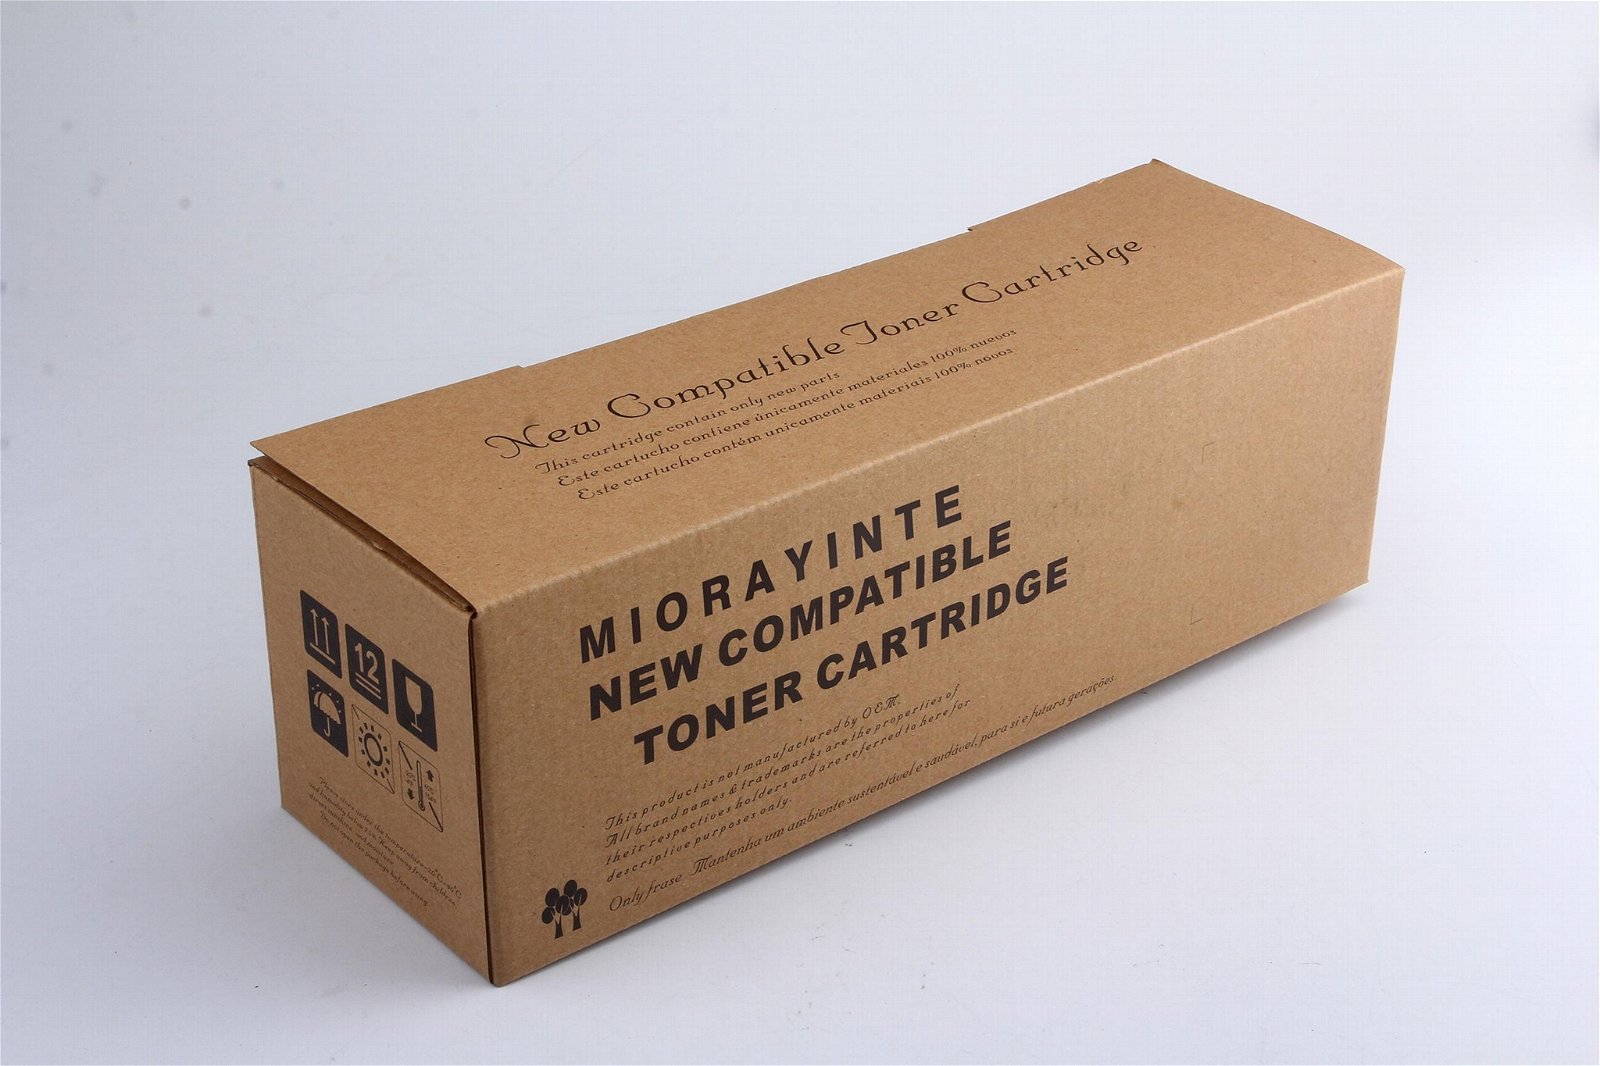 MIORAYINTE Brand 4092A compatible toner cartridge for use on Brother printer 3